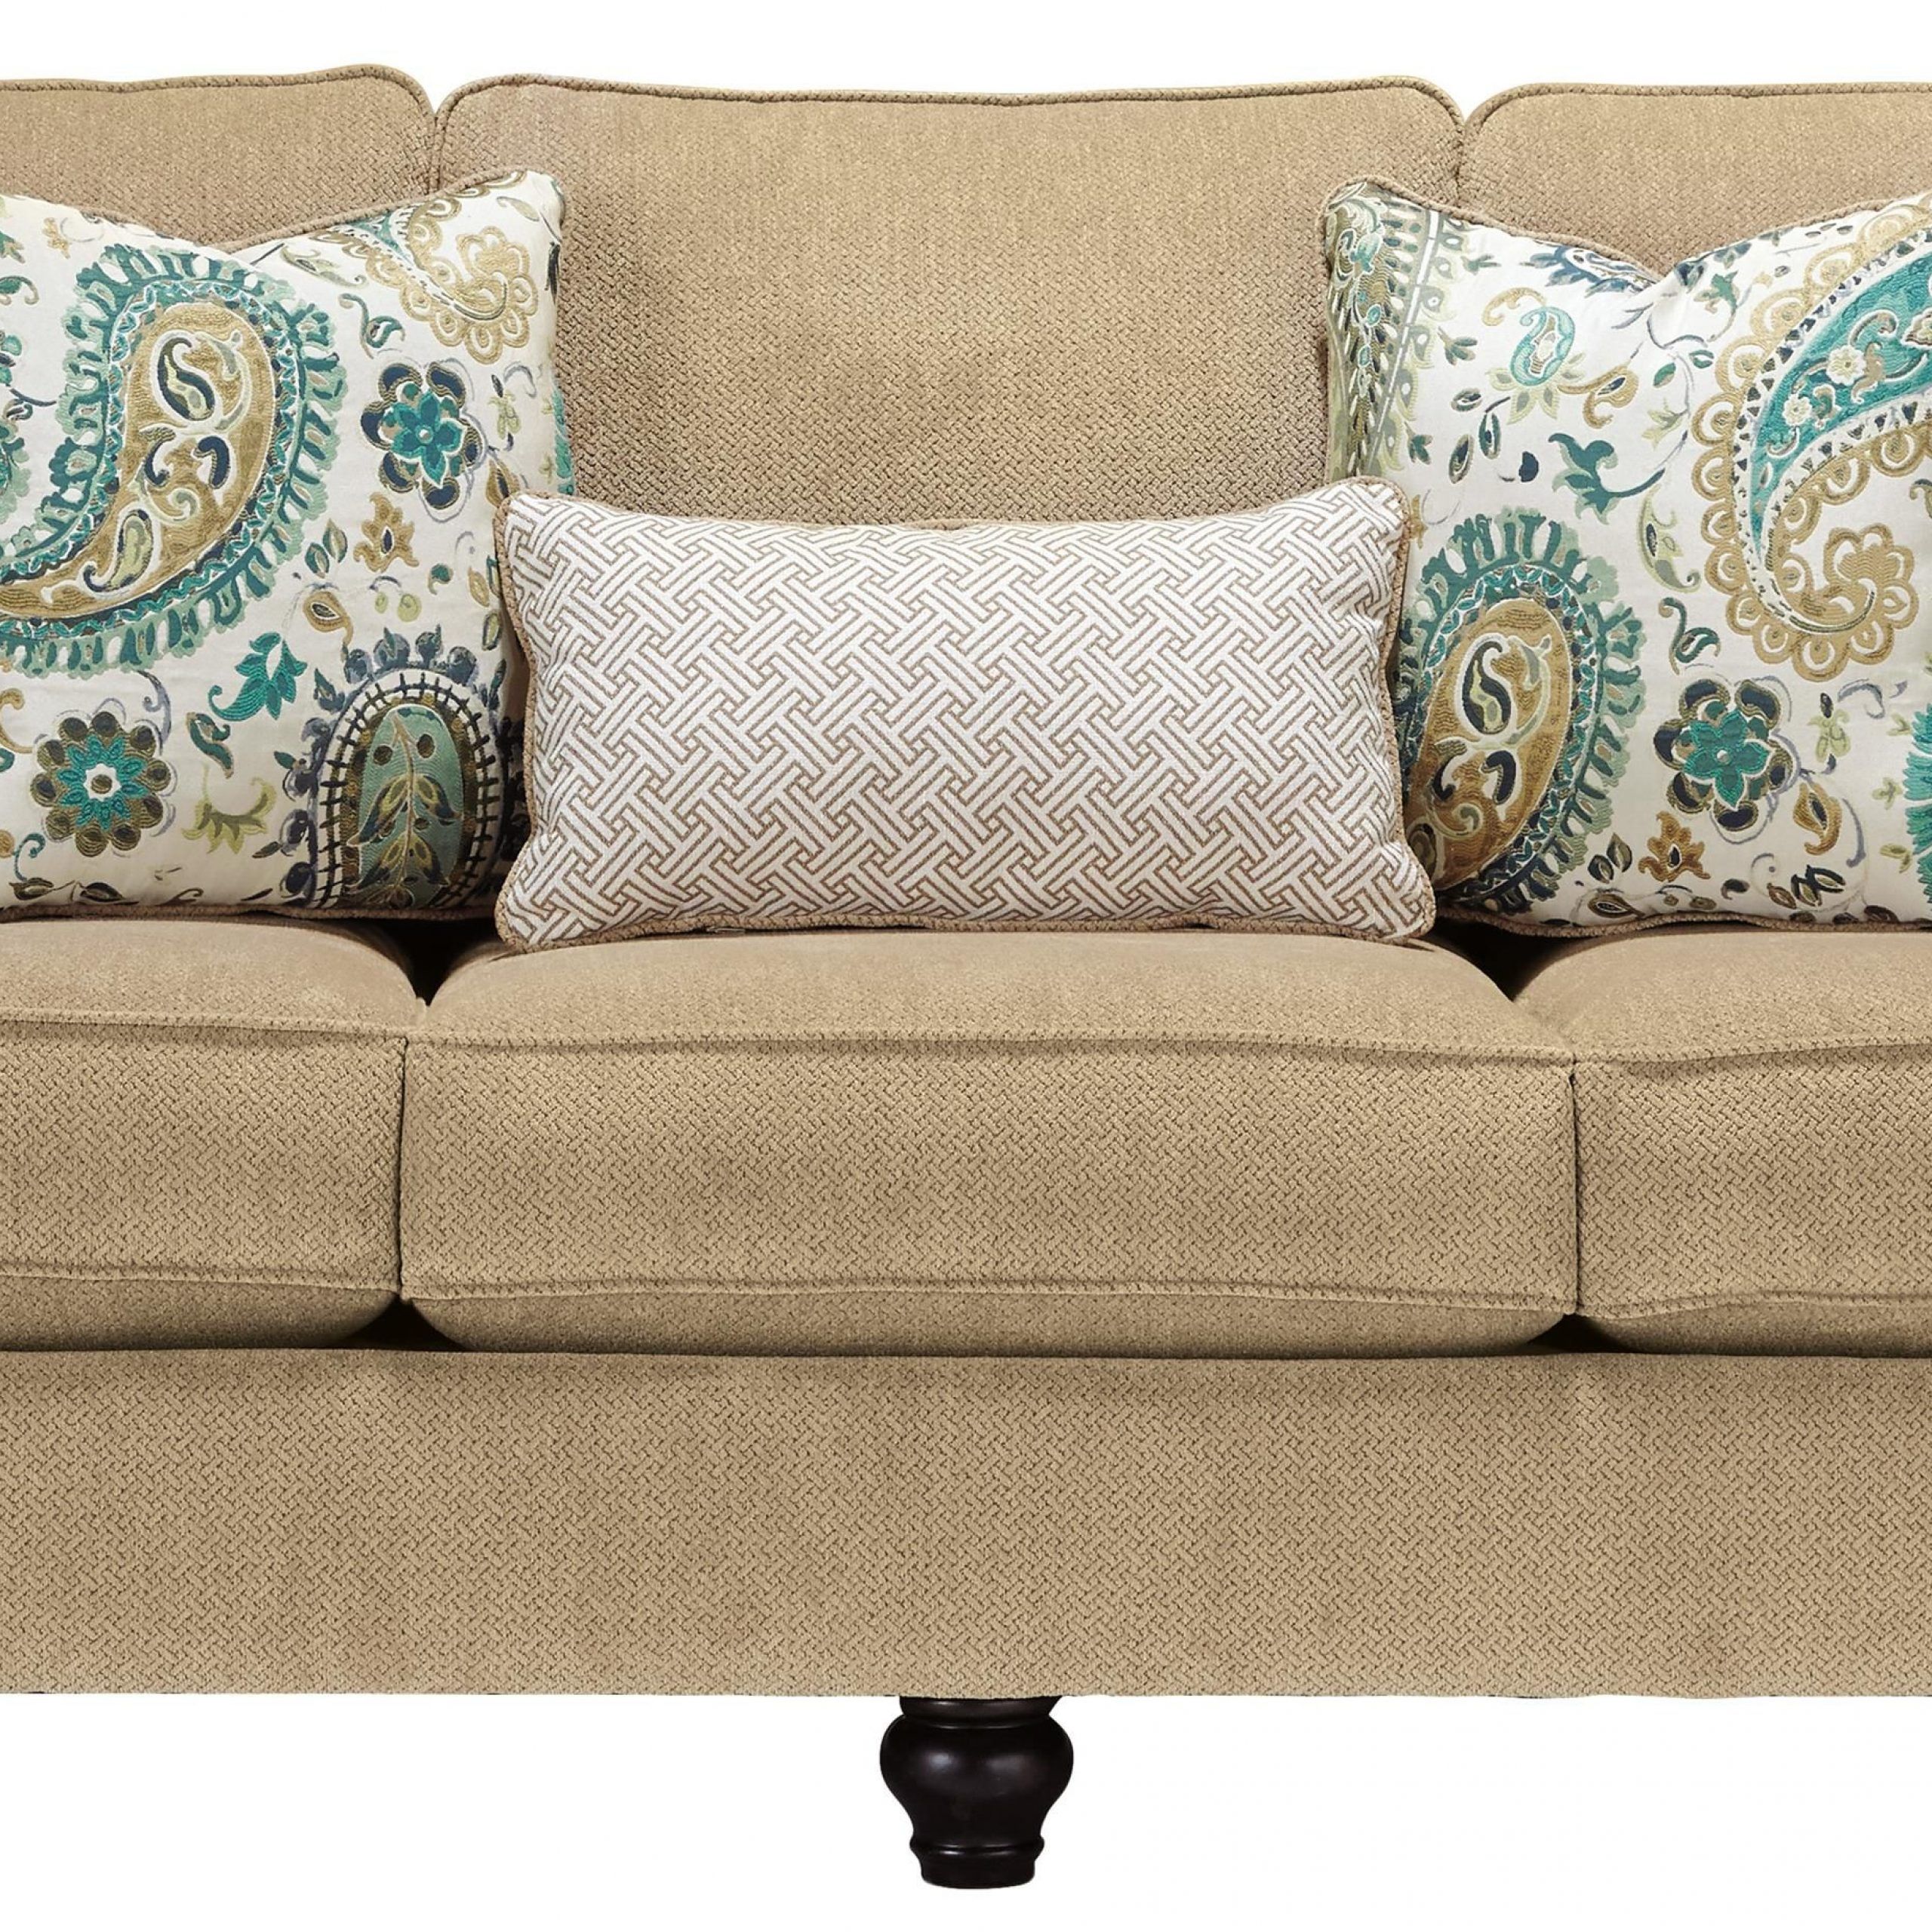 Lochian Sofa With Reversible Coil Seat Cushions & English Intended For Debbie Coil Sectional Futon Sofas (View 14 of 15)